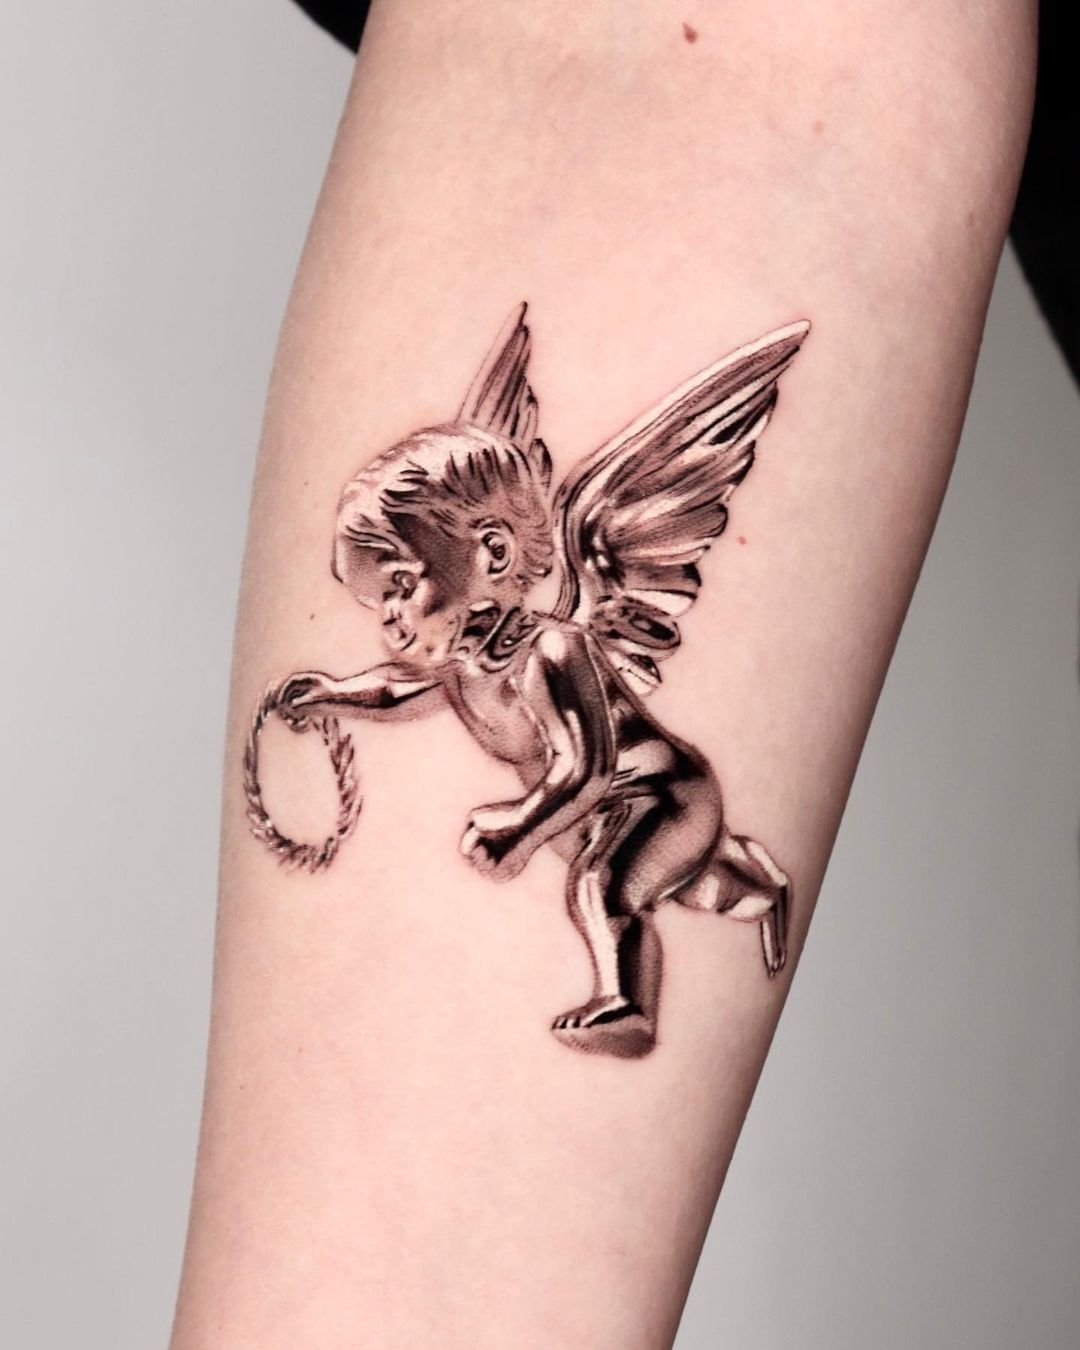 Angel tattoo designs by chan hontattoo